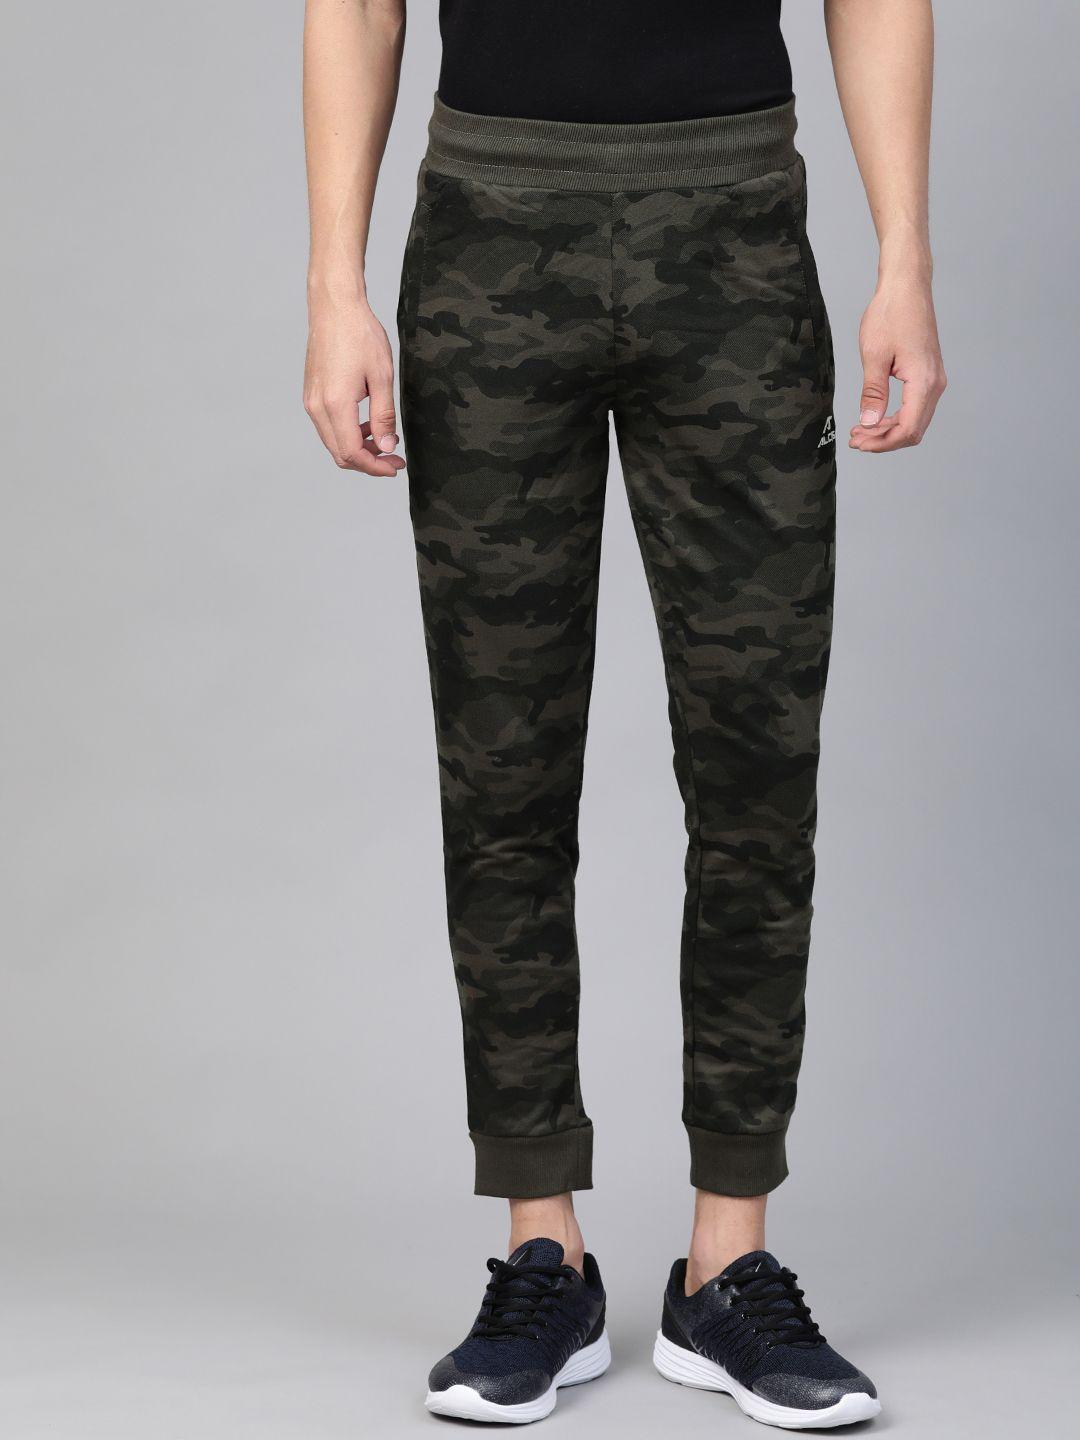 alcis-men-olive-green-straight-fit-camouflage-printed-joggers